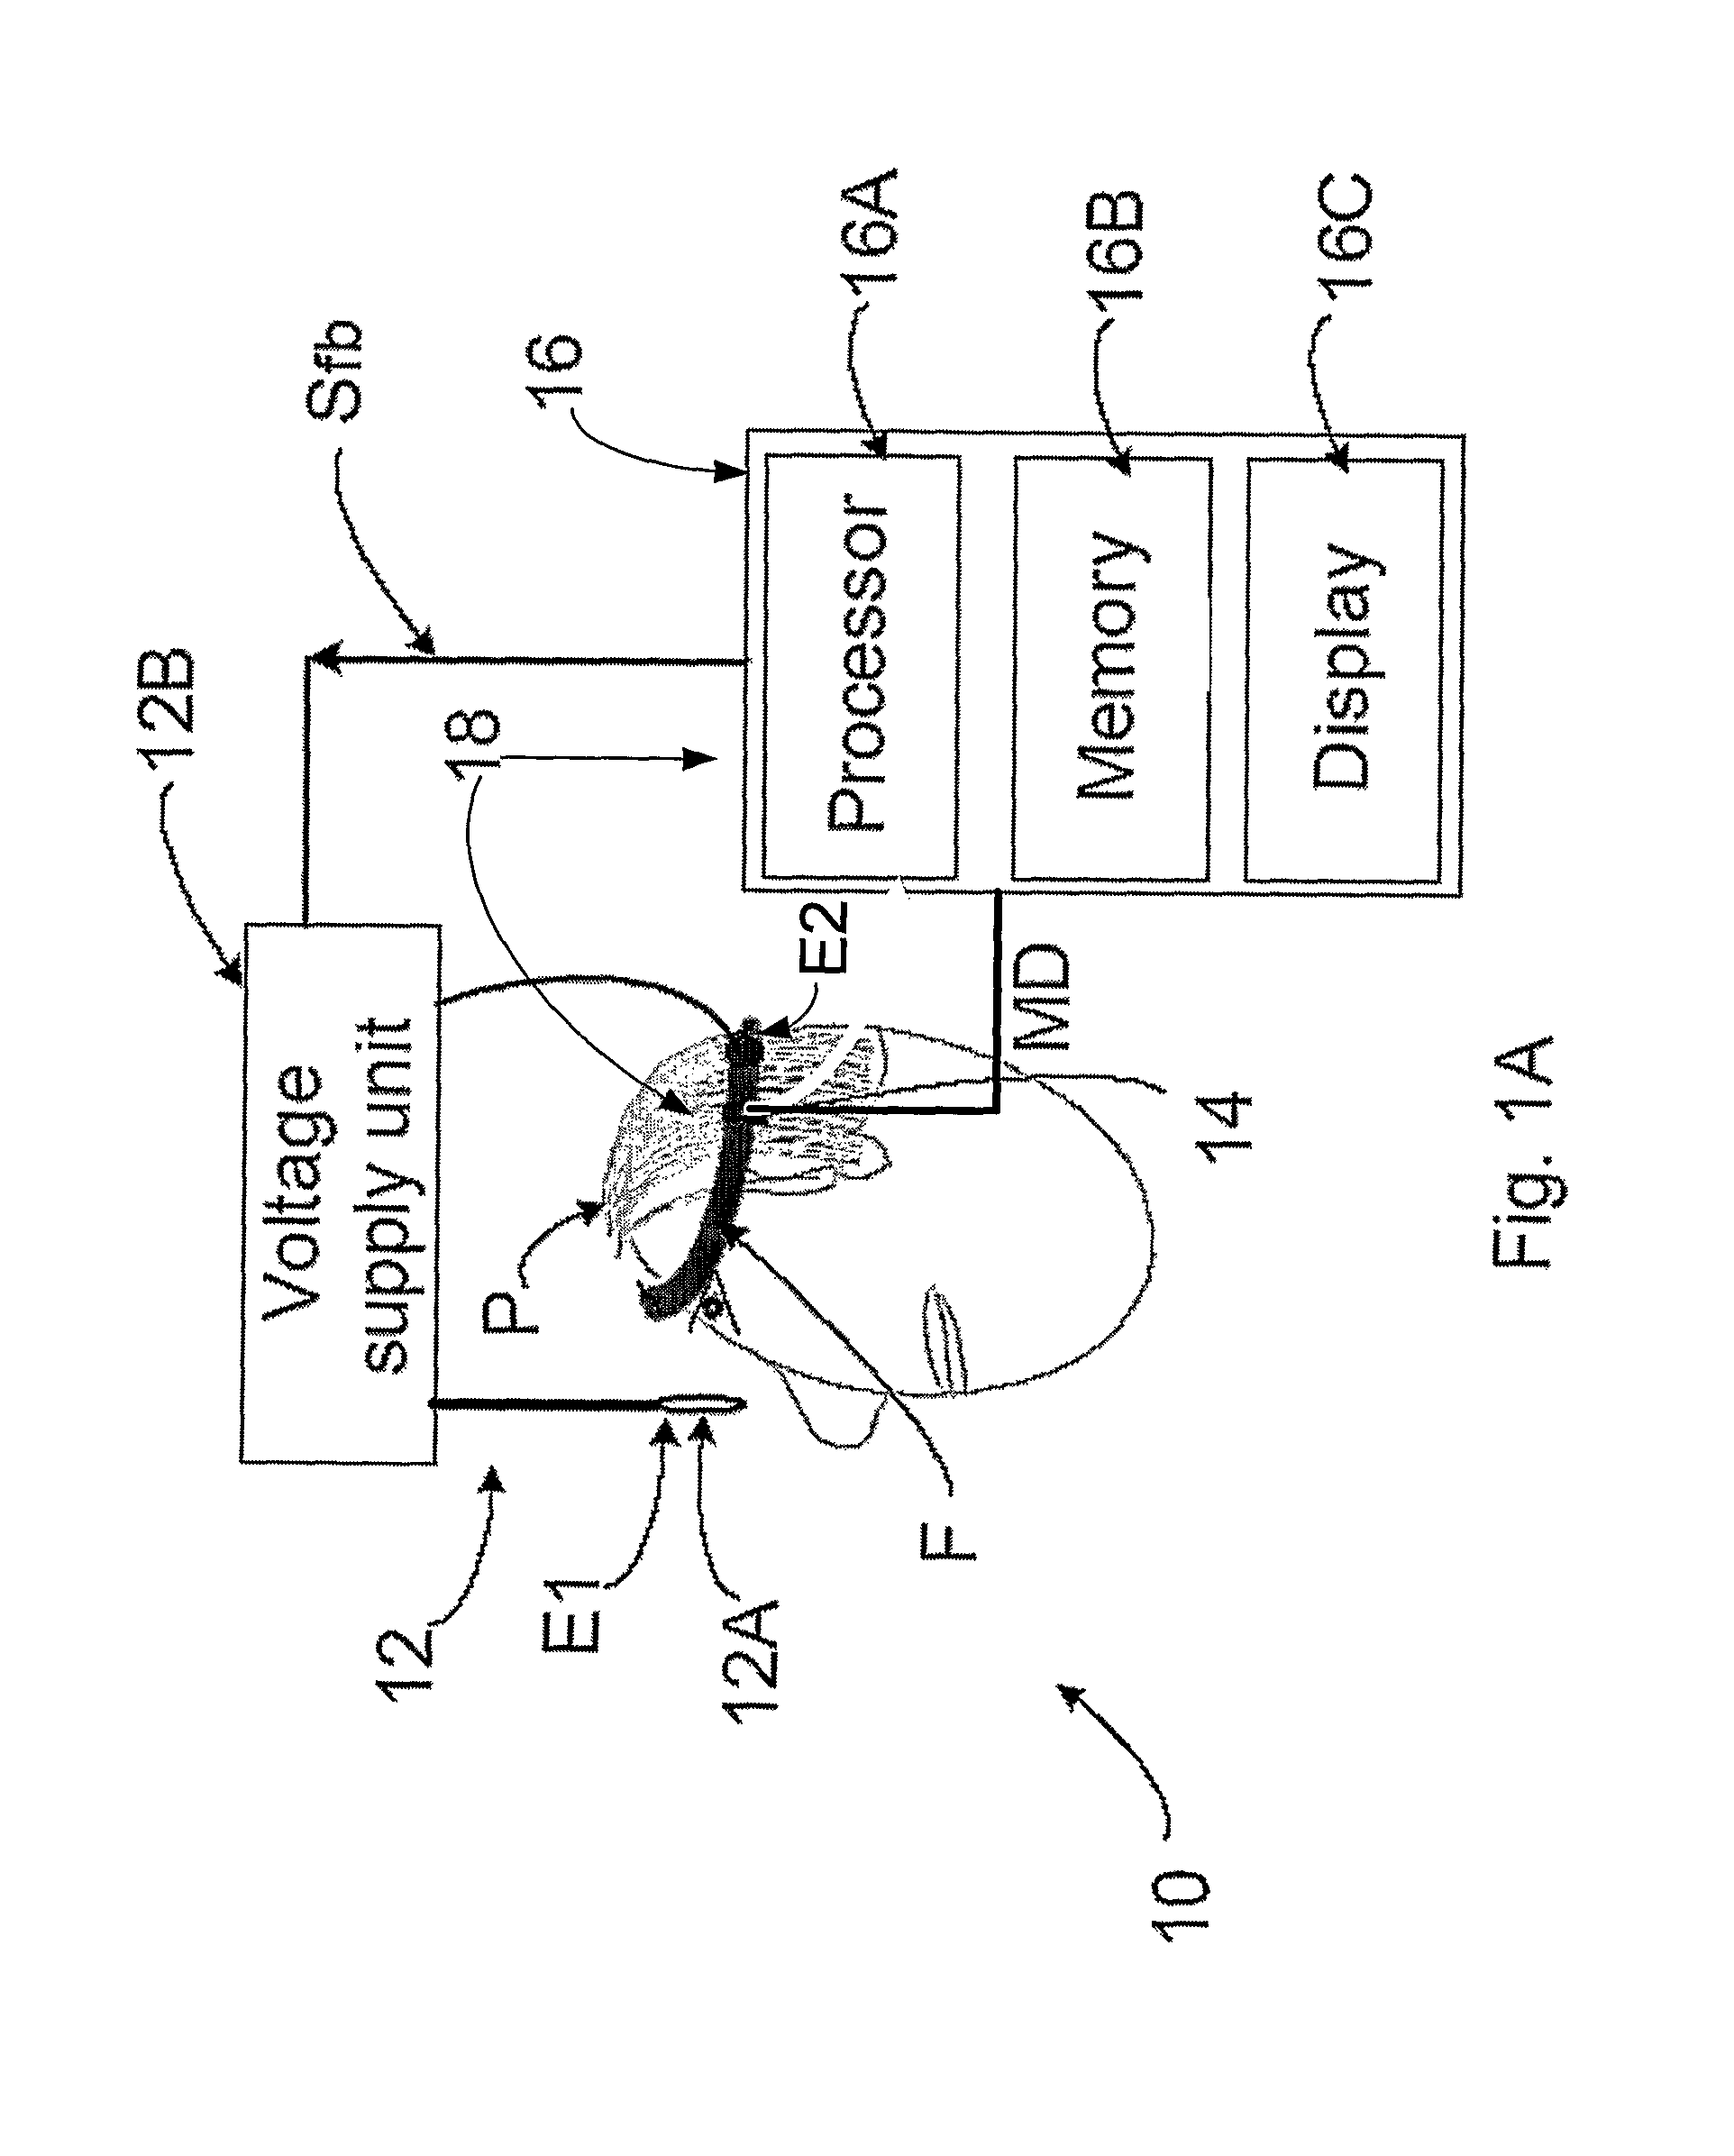 Device and method for pupil size modulation